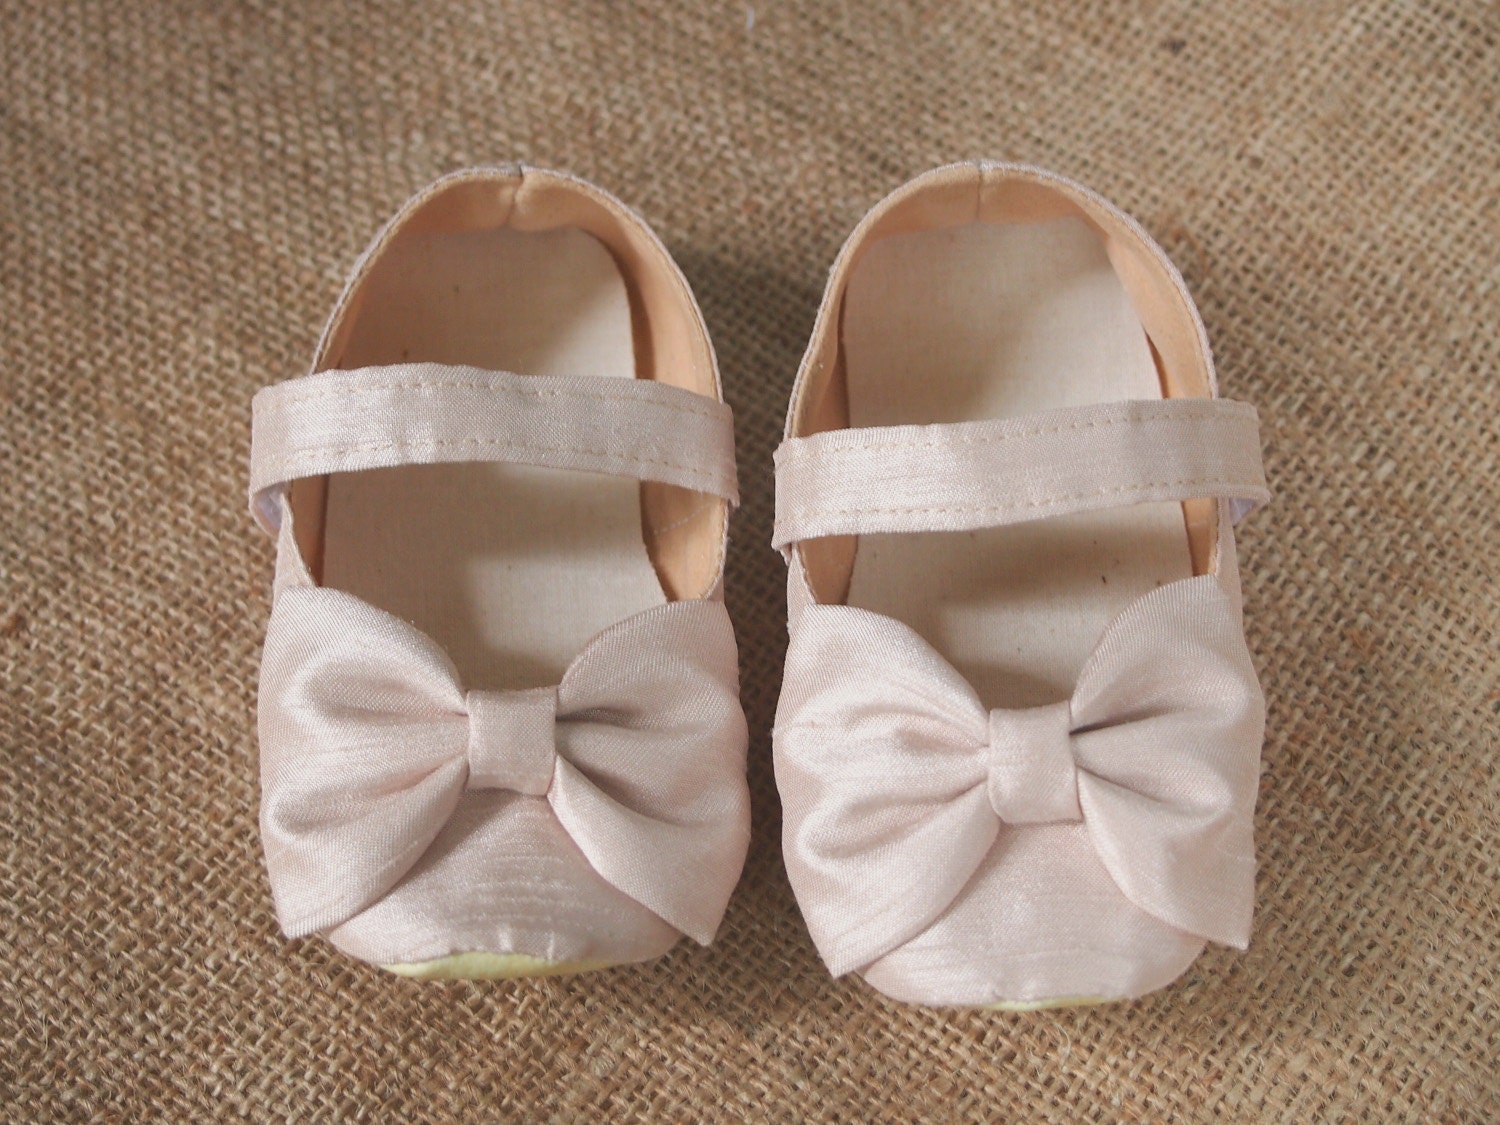 Baby Shoes, Bow, Champagne, Cream, Infant, Newborn, New Baby, Wedding ...